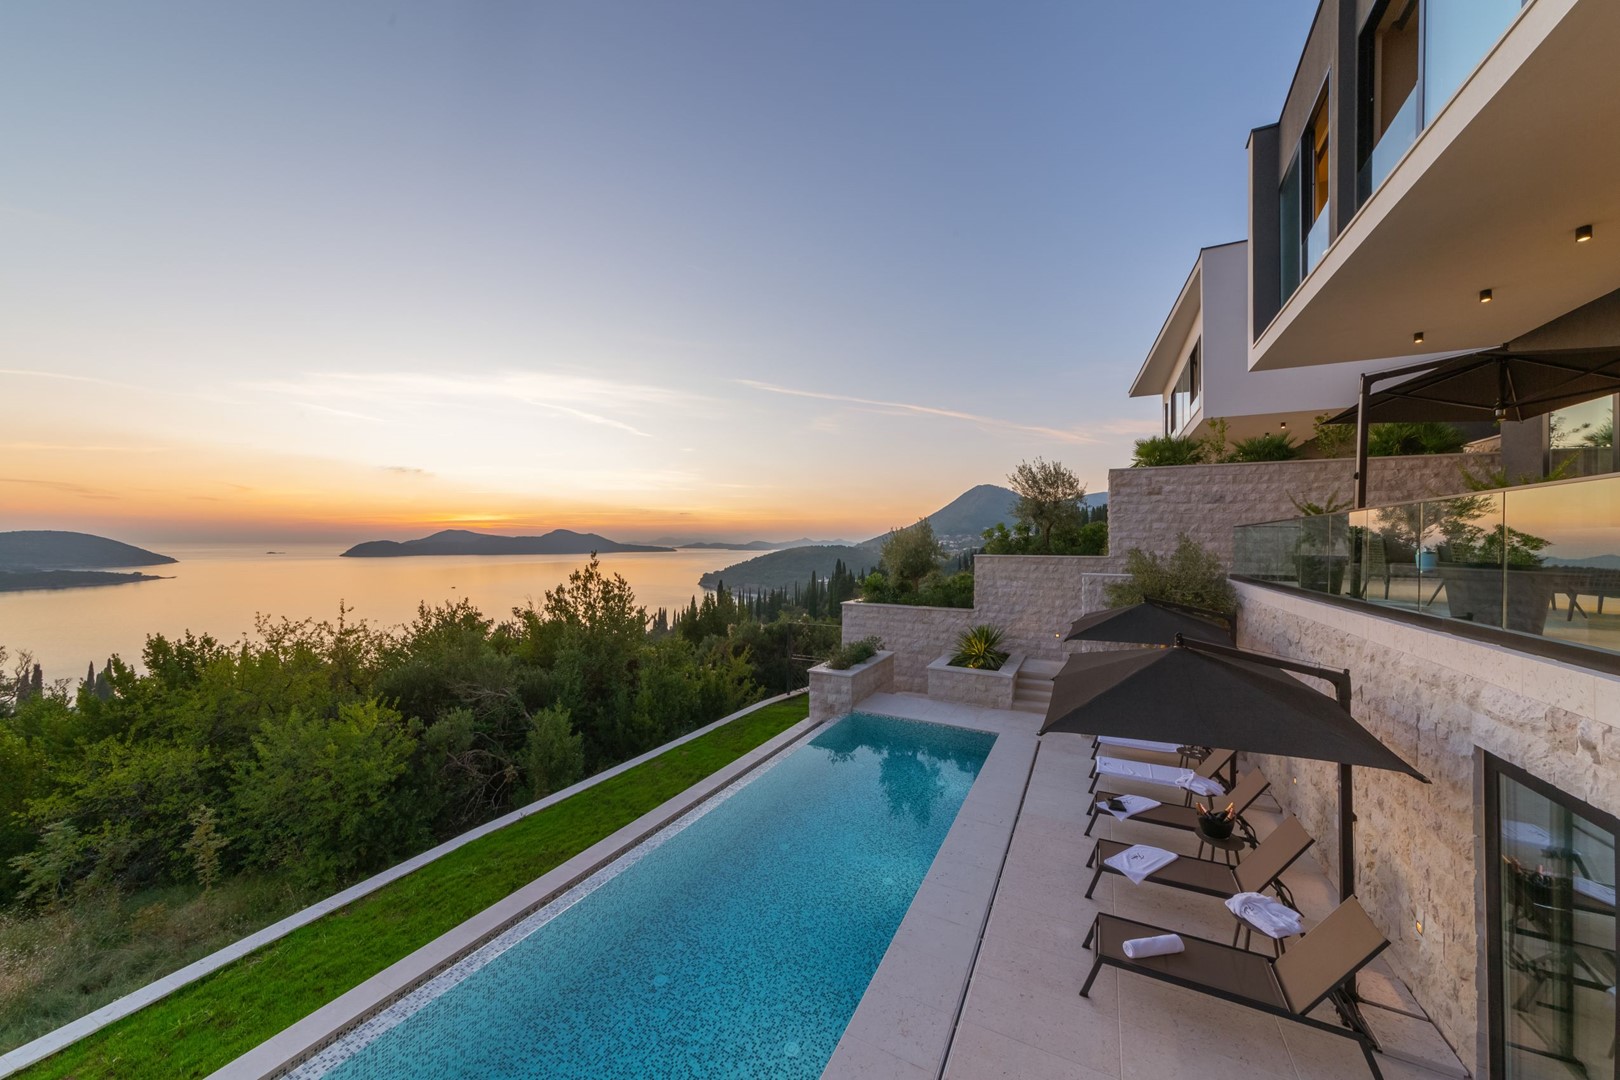 Luxury villa Frida in Croatia with private terrace with pool and concierge service for vacation and rent with friends and family near the beach